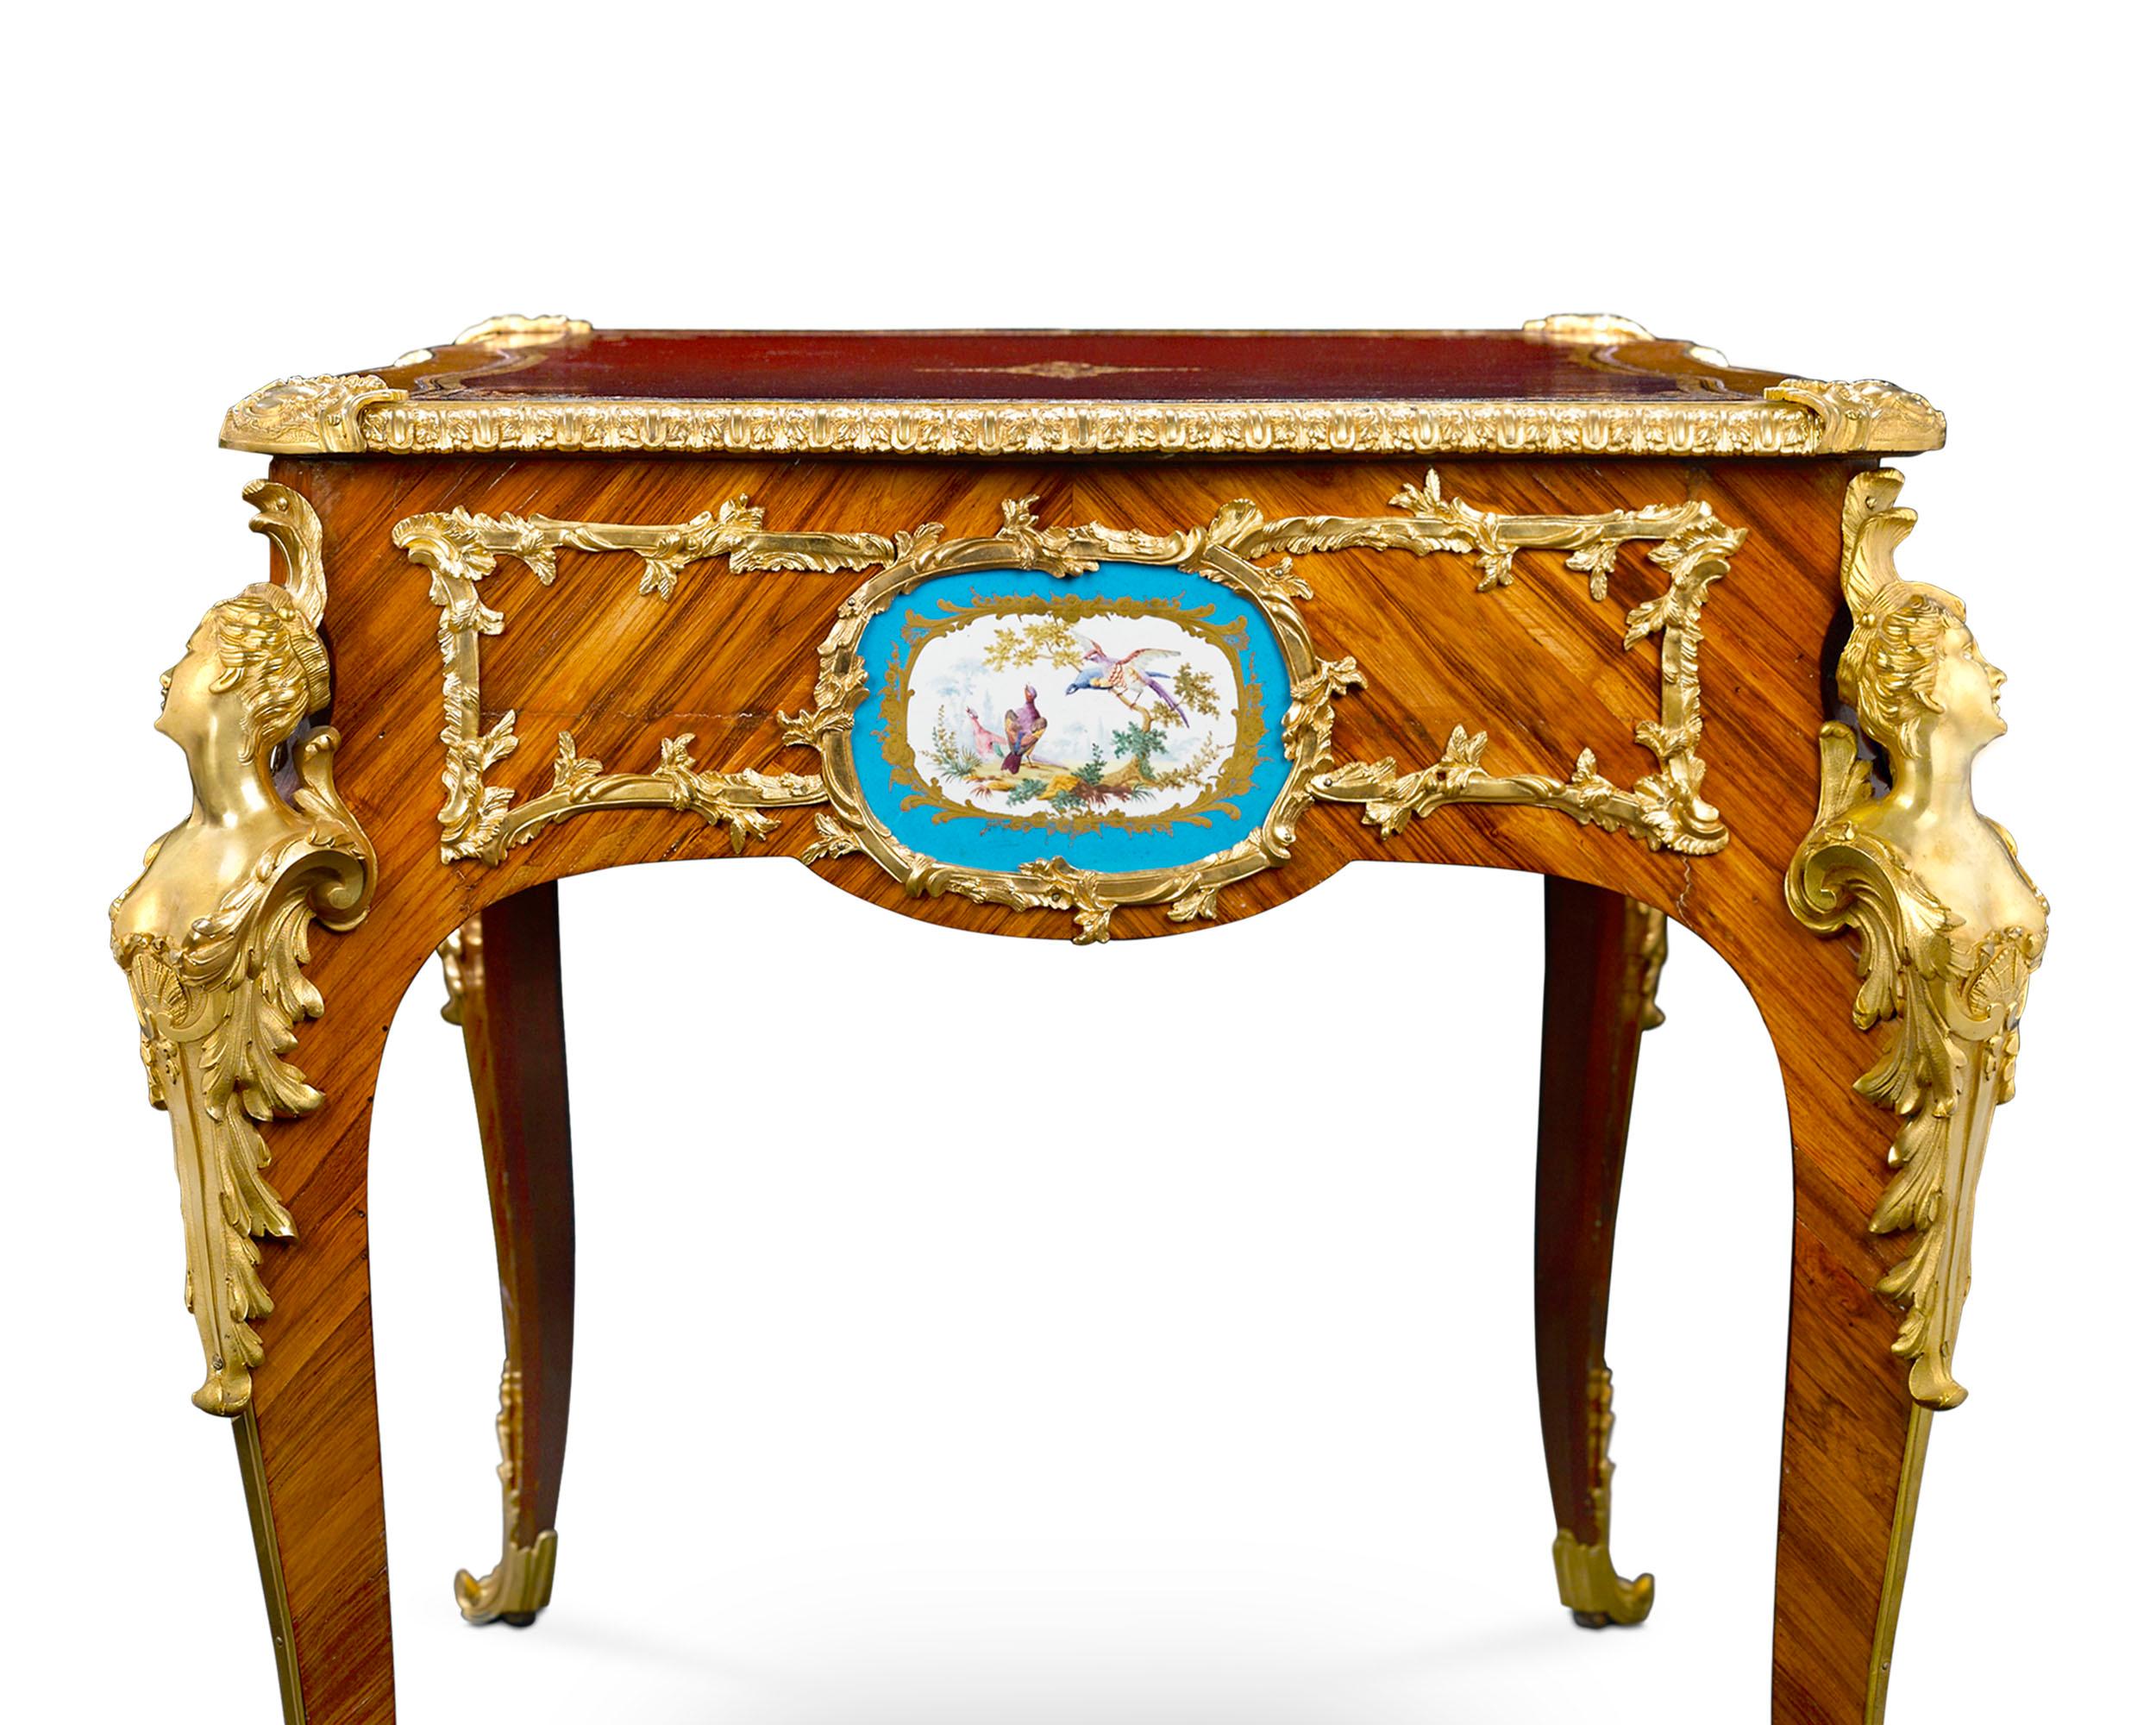 Form and function converge in this exceptional Louis XV-style bureau plat graced with eight elegant Sèvres Porcelain plaques. Framing these delightful, hand painted floral and fowl-themed plaques is a network of exquisite gilt bronze. Supporting the